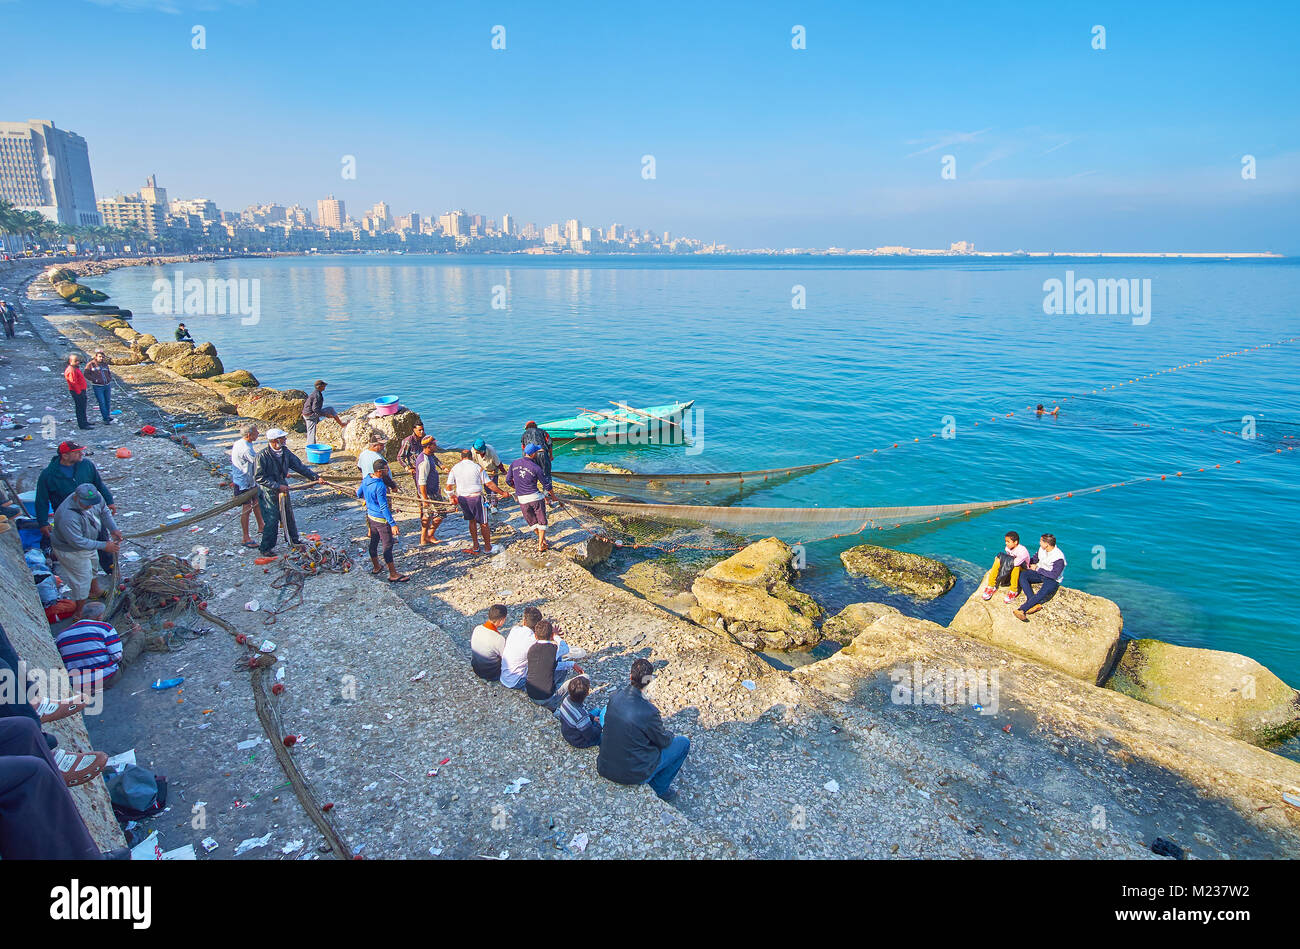 ALEXANDRIA, EGYPT - DECEMBER 17, 2017: The fishermen crew at work in the city center with a view on buildings on Corniche avenue, stretching along the Stock Photo